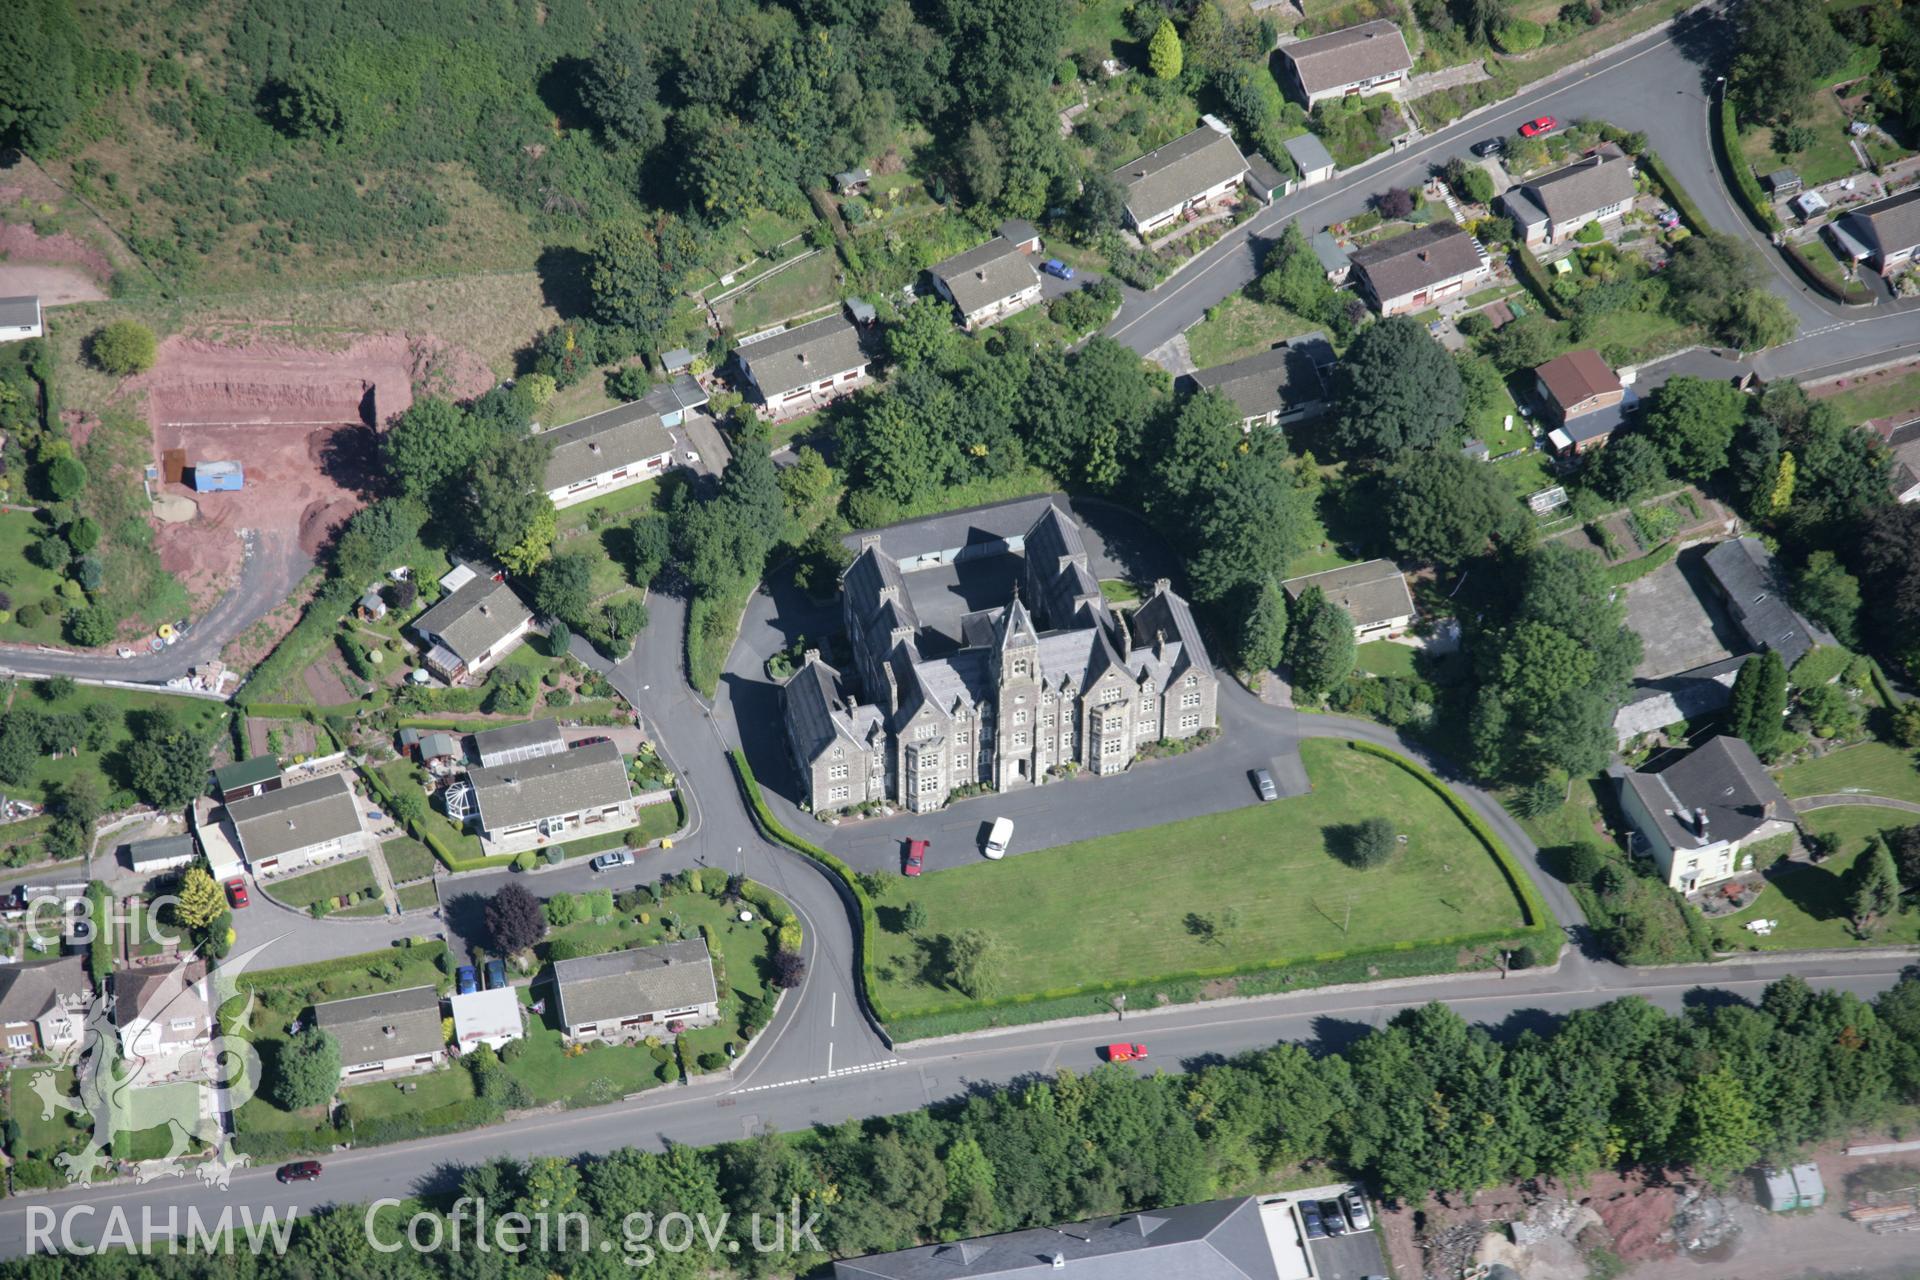 RCAHMW colour oblique aerial photograph of Congregational Memorial College (Camden Court), Camden Road, Brecon. Taken on 02 September 2005 by Toby Driver